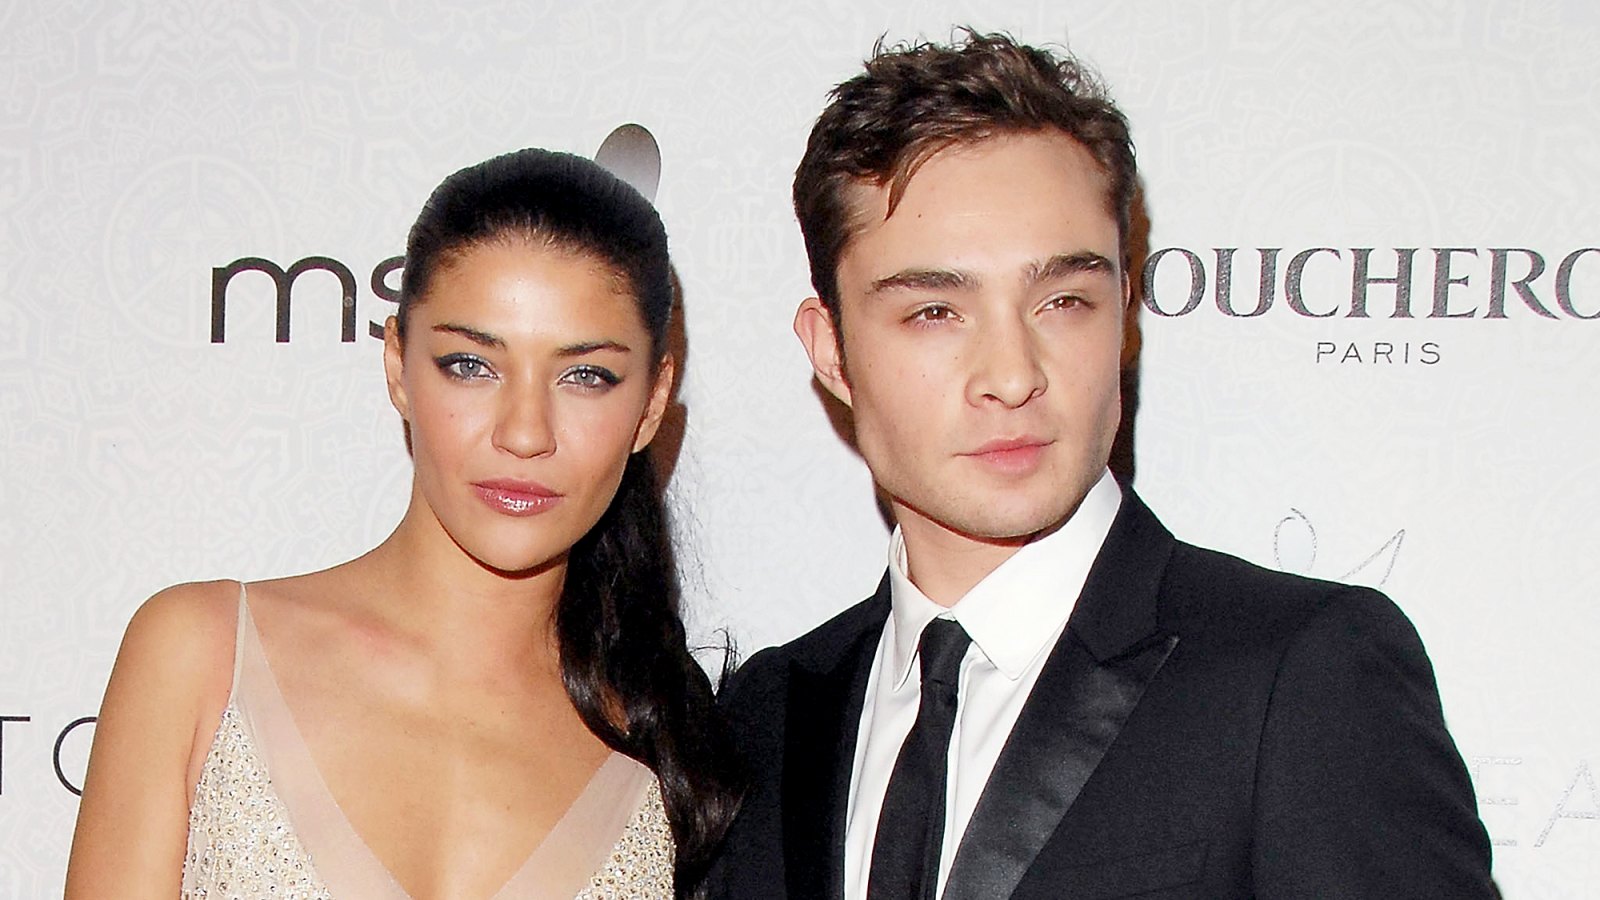 Jessica Szohr and Ed Westwick arrive at The Art of Elysium's 3rd Annual Black-Tie Charity Gala "Heaven" at 9900 Wilshire Blvd in Beverly Hills, California.